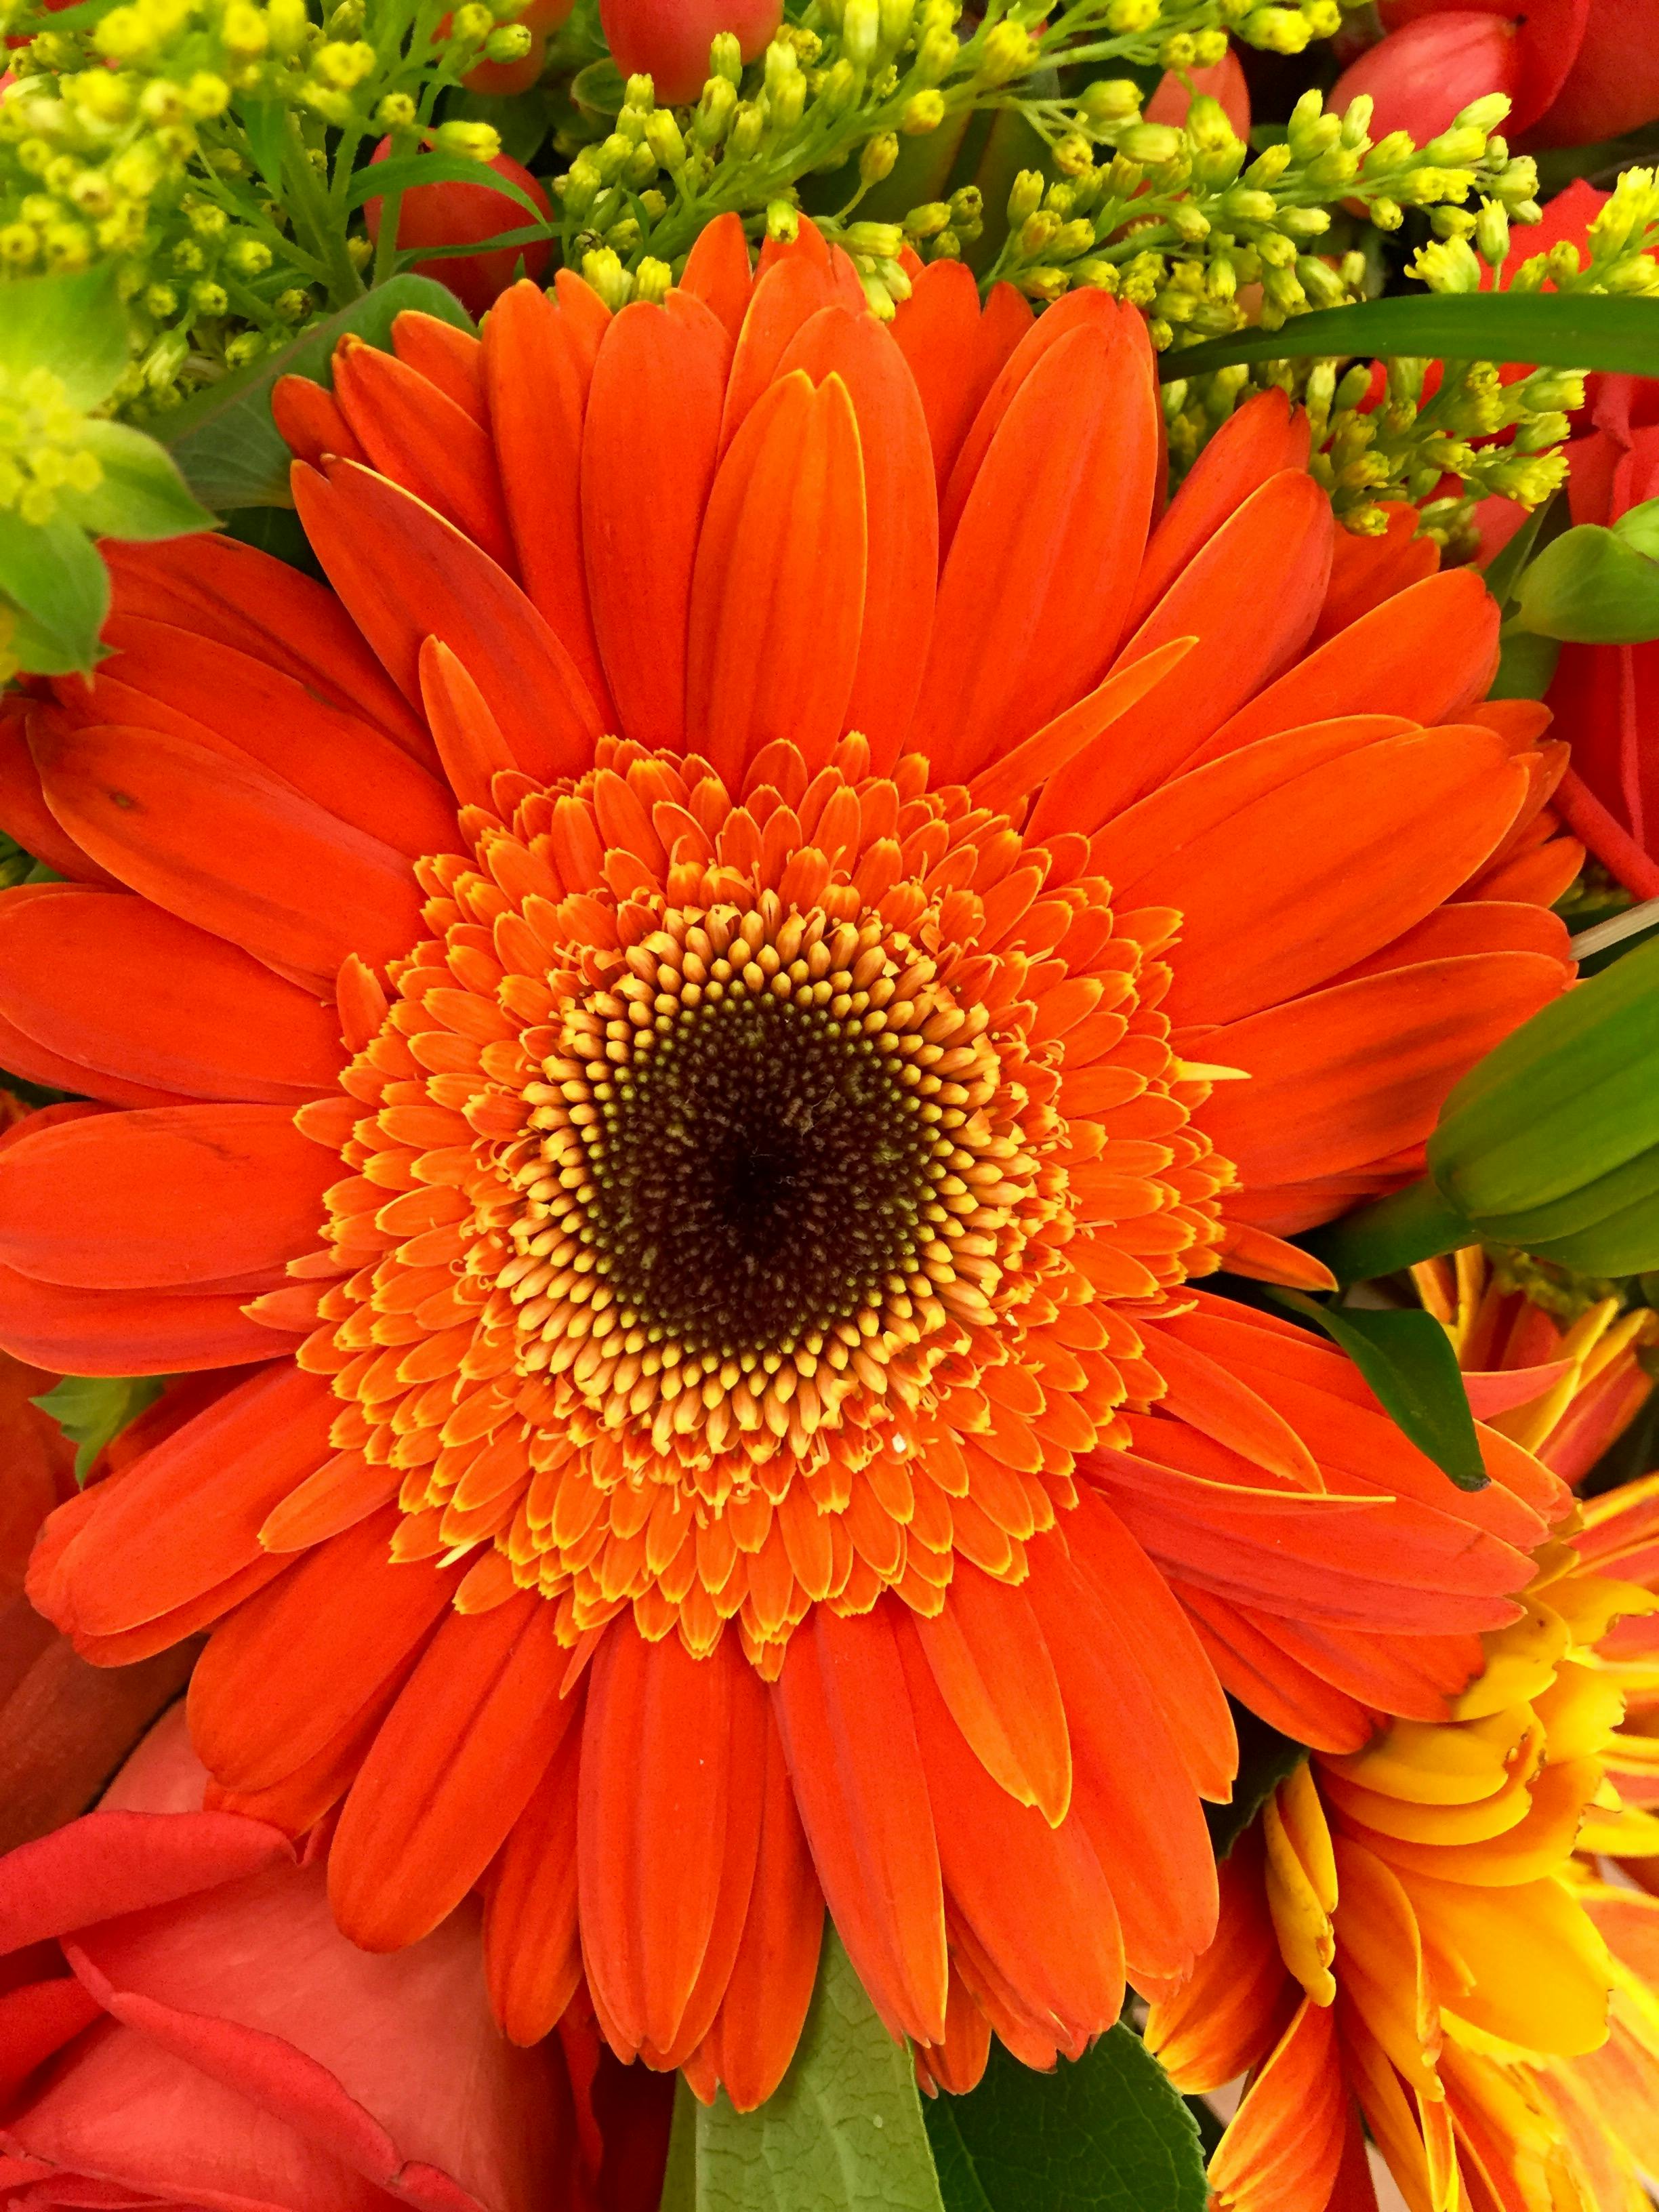 Orange and Black Petaled Flower in a Close Up Photography during Daytime